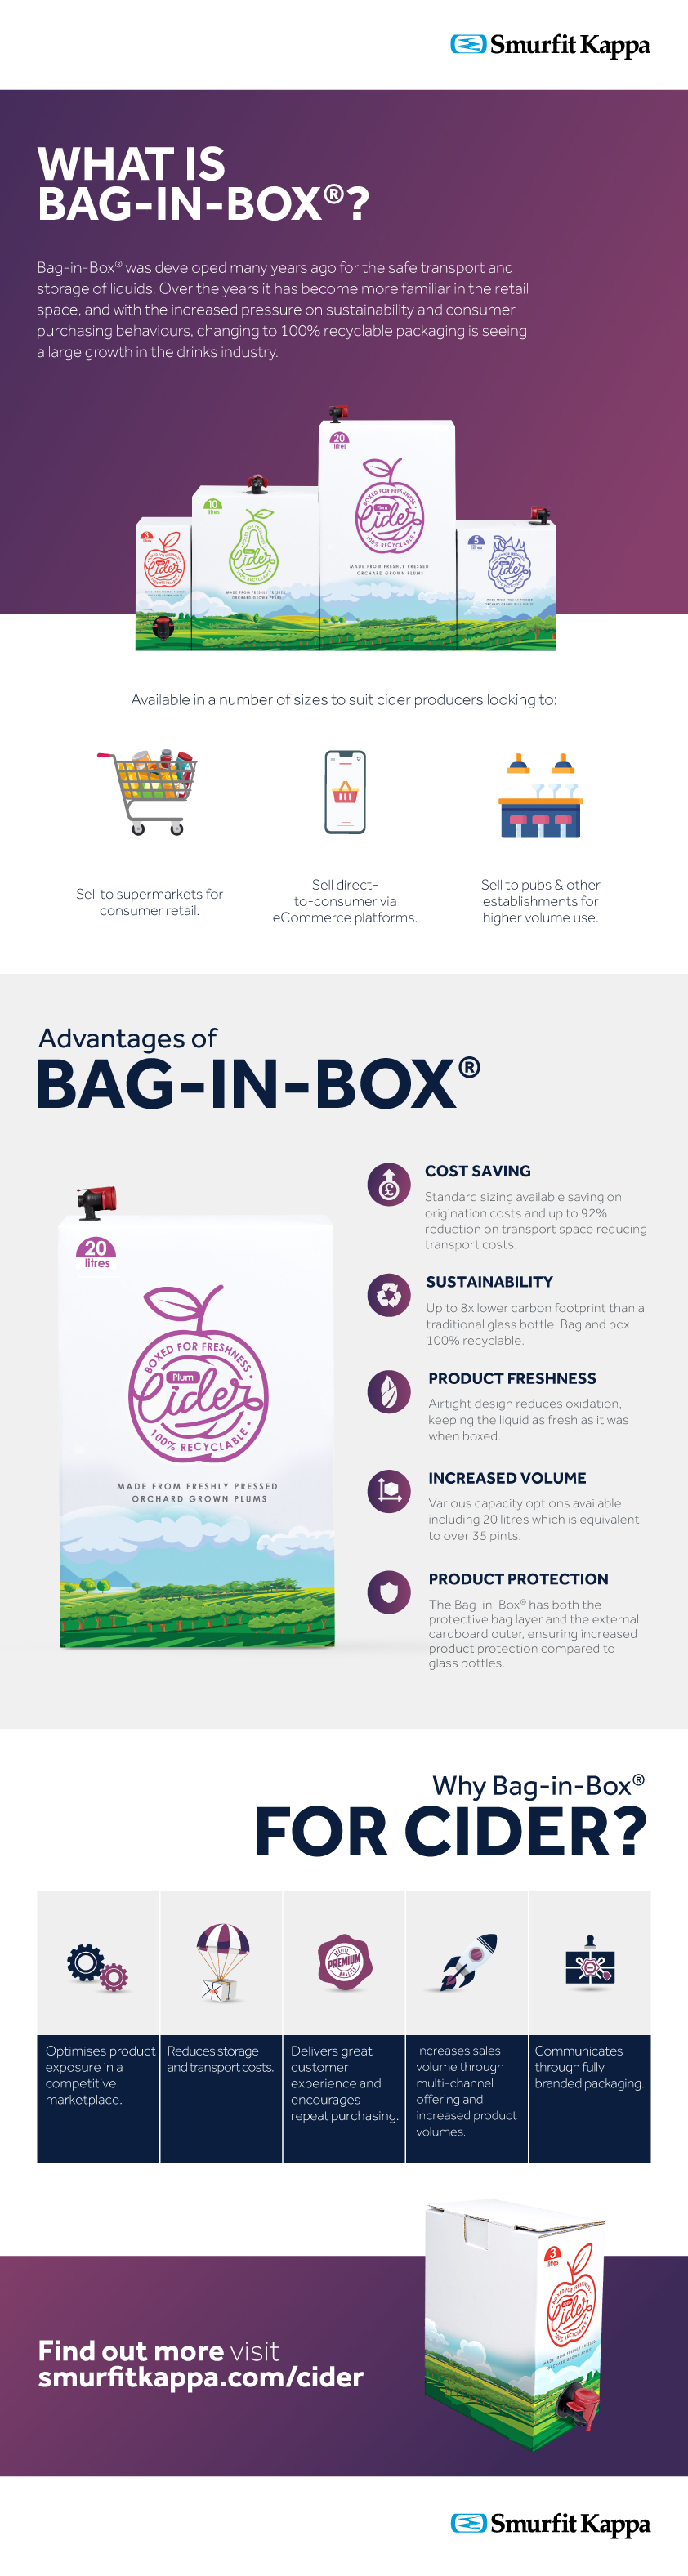 Bag-in-Box, Cider Packaging, Infographic